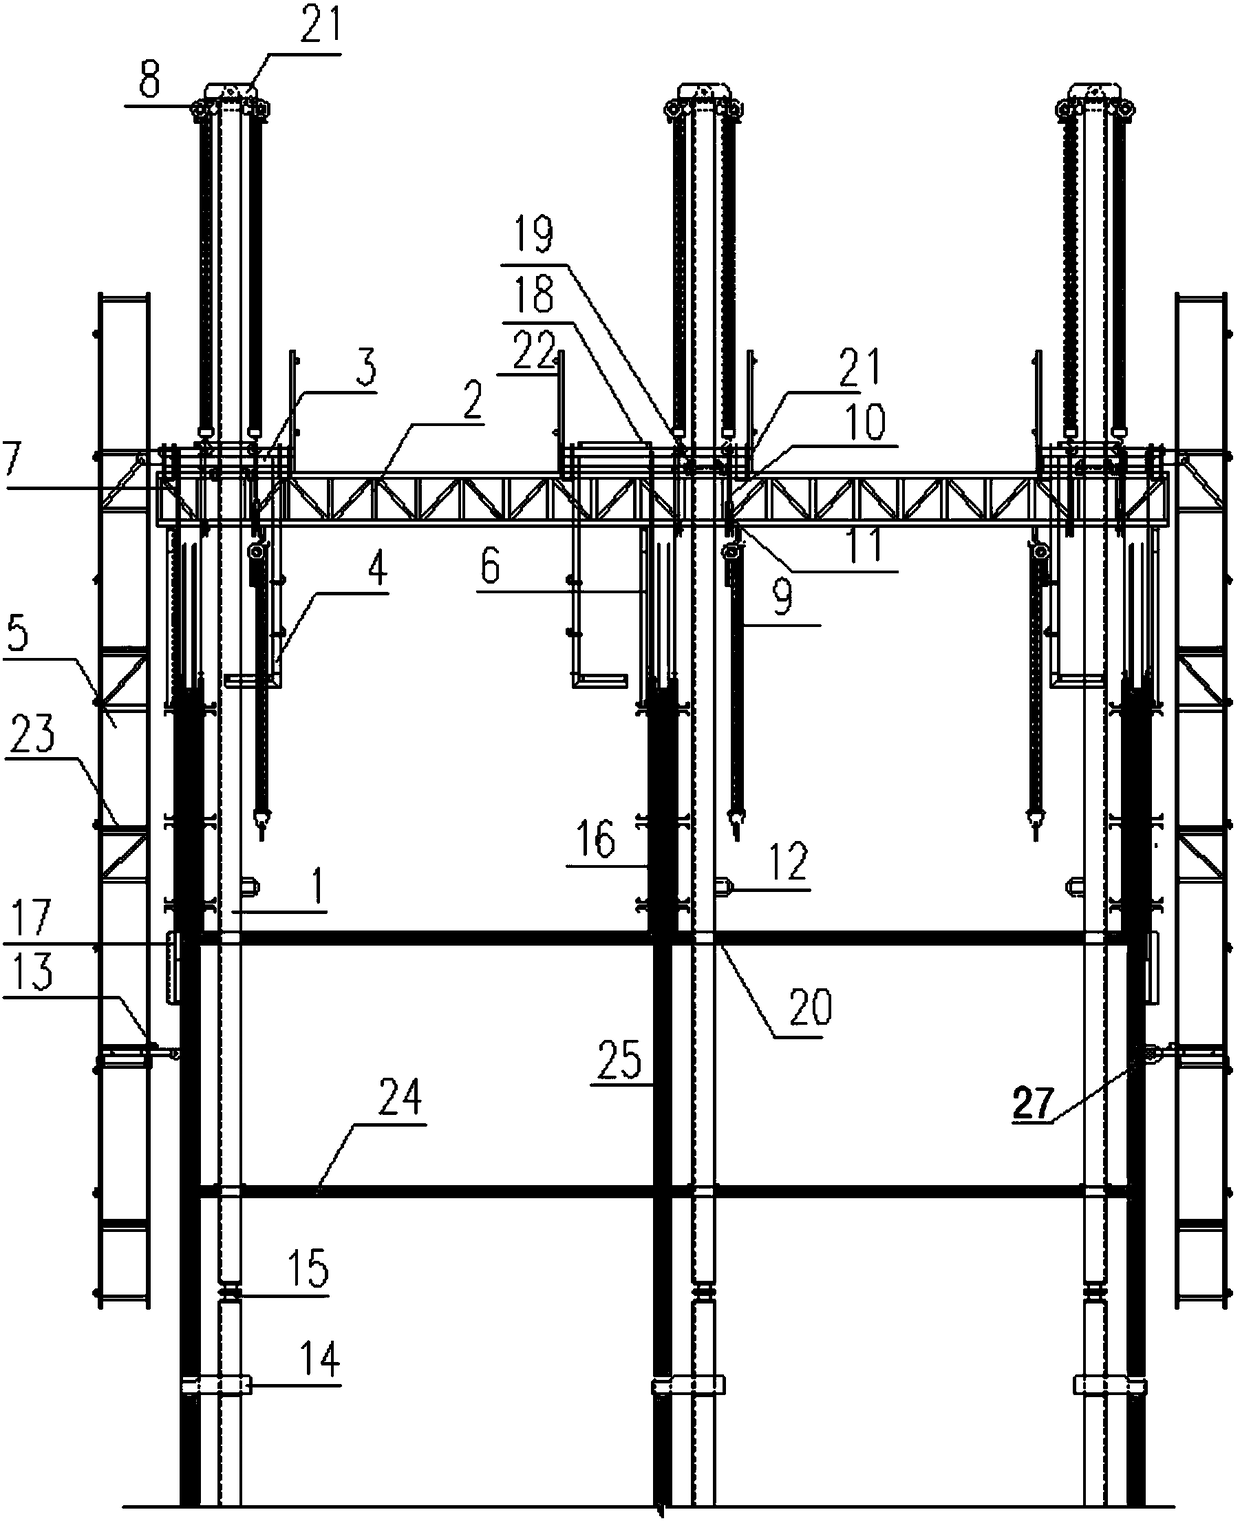 High-rise building construction steel formwork and operation frame integral lifting platform device